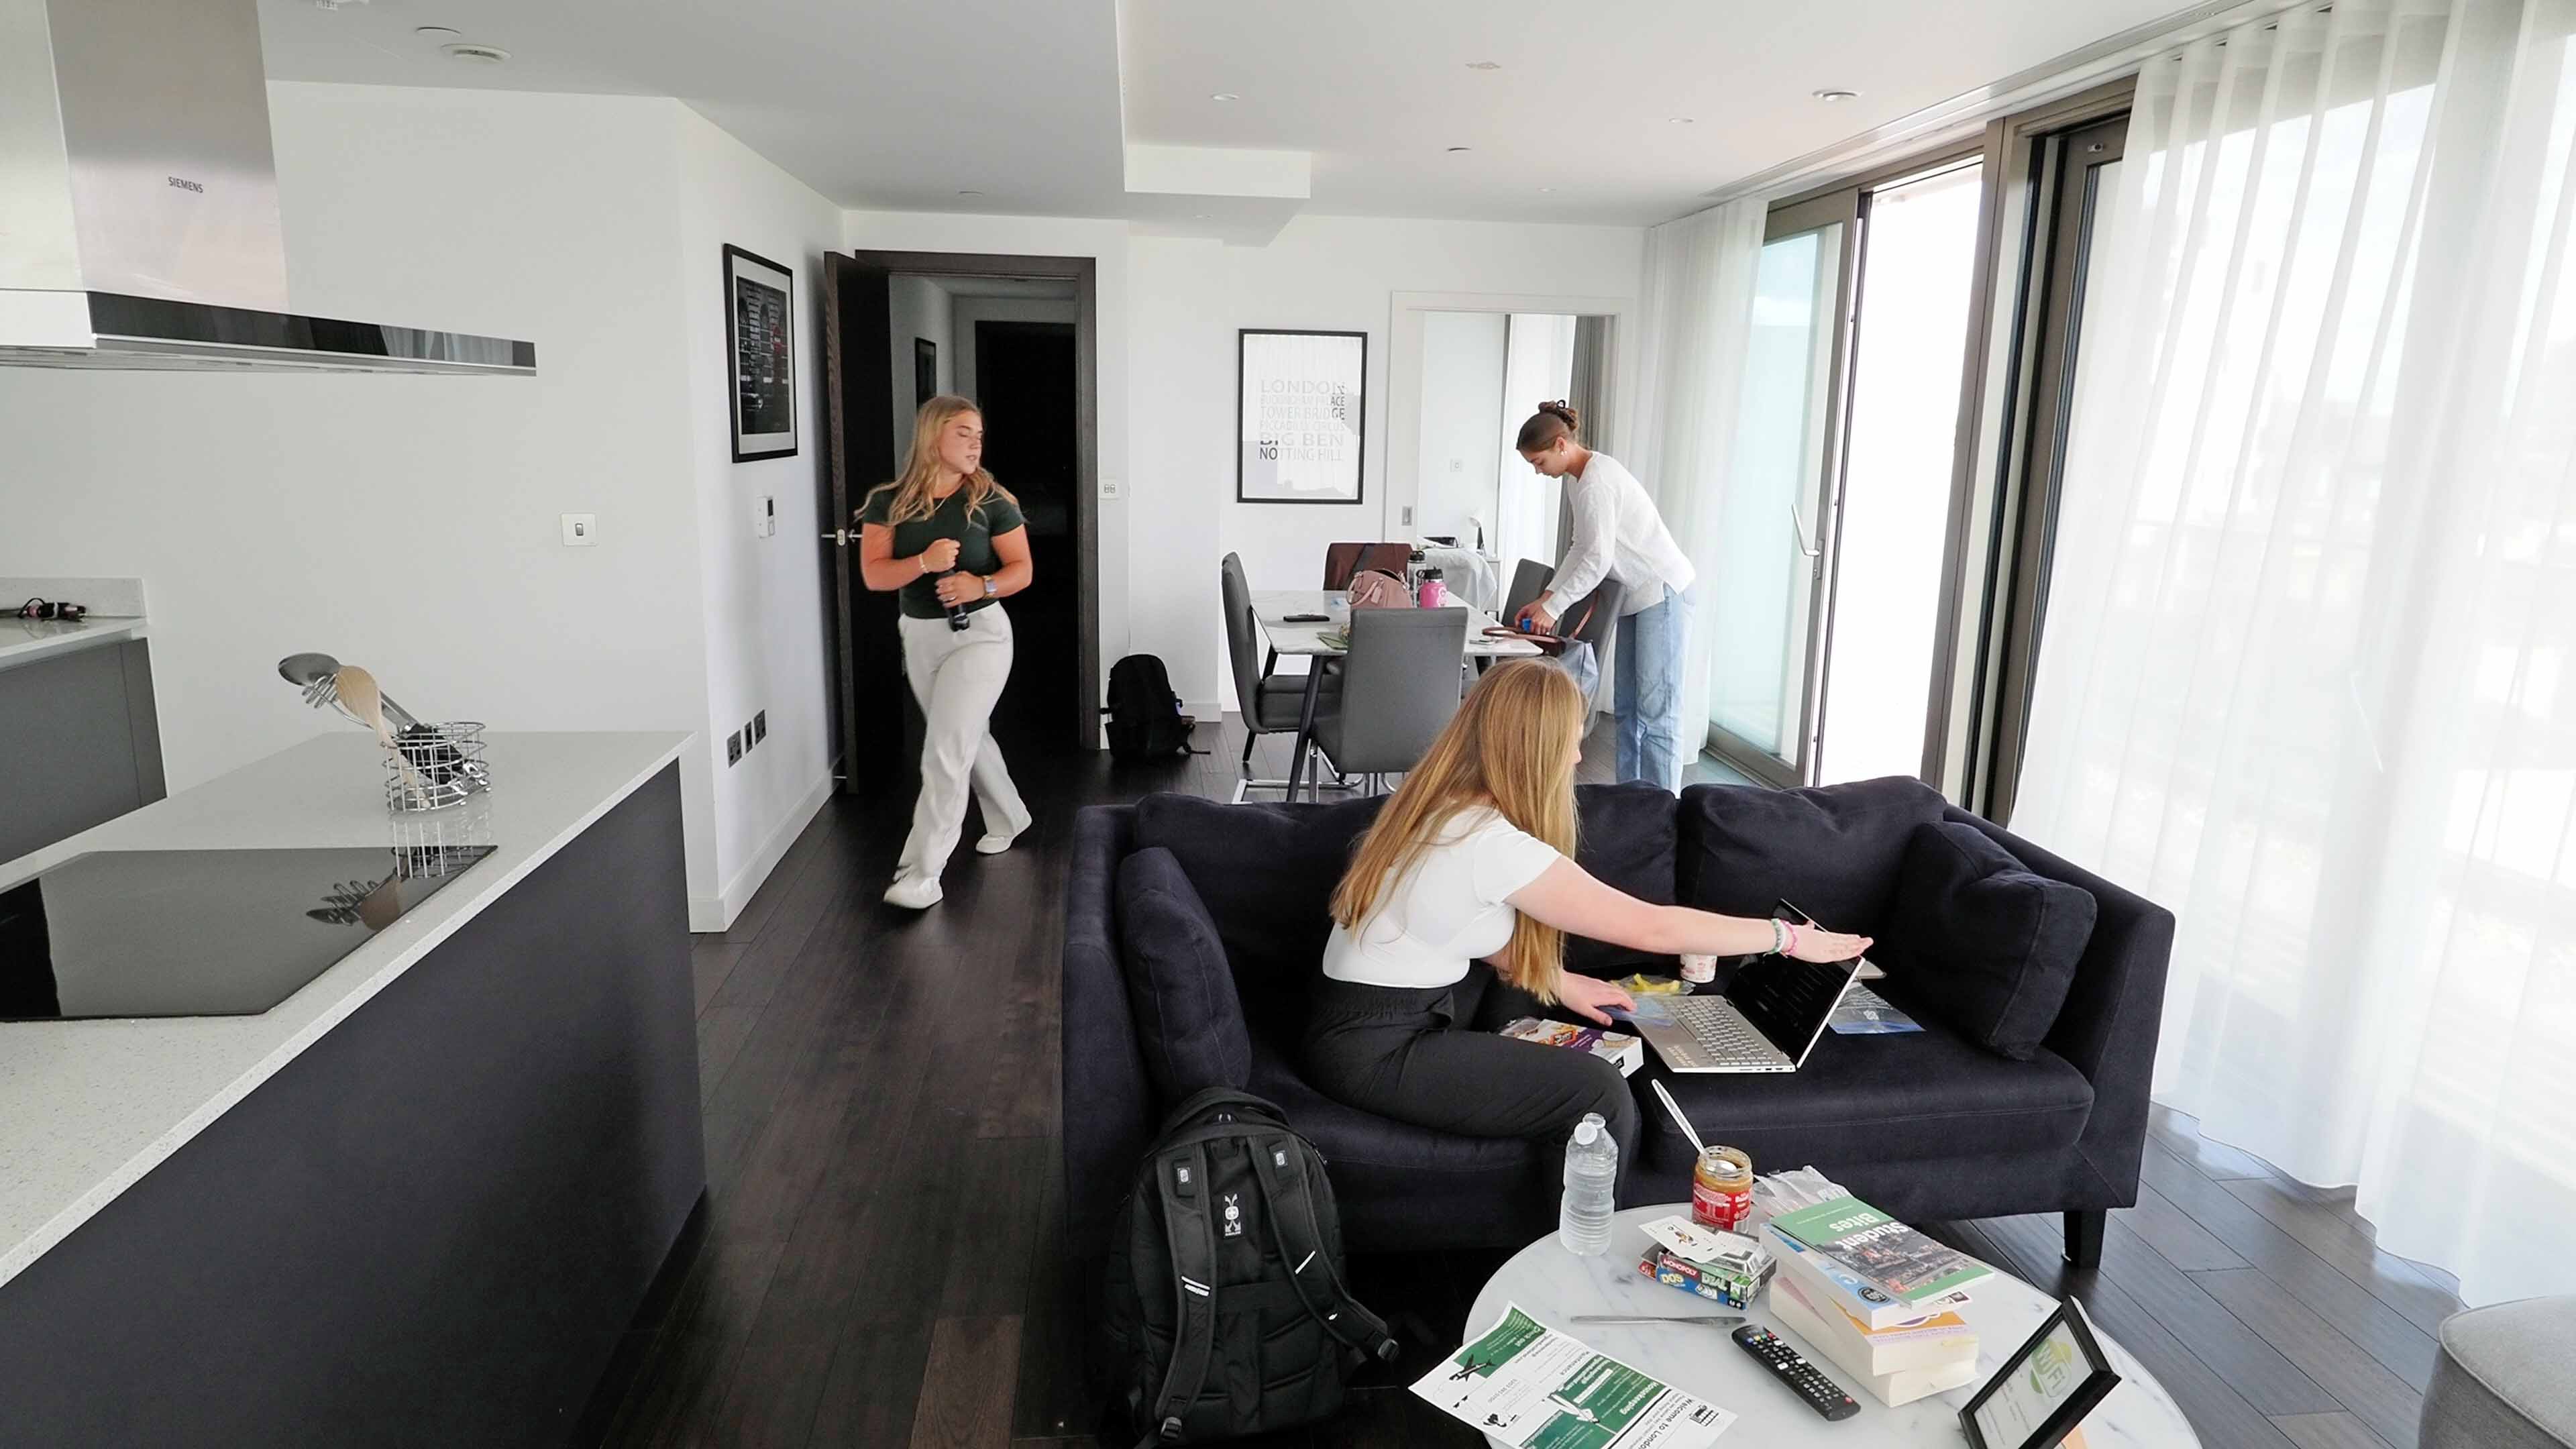 Students in a London apartment